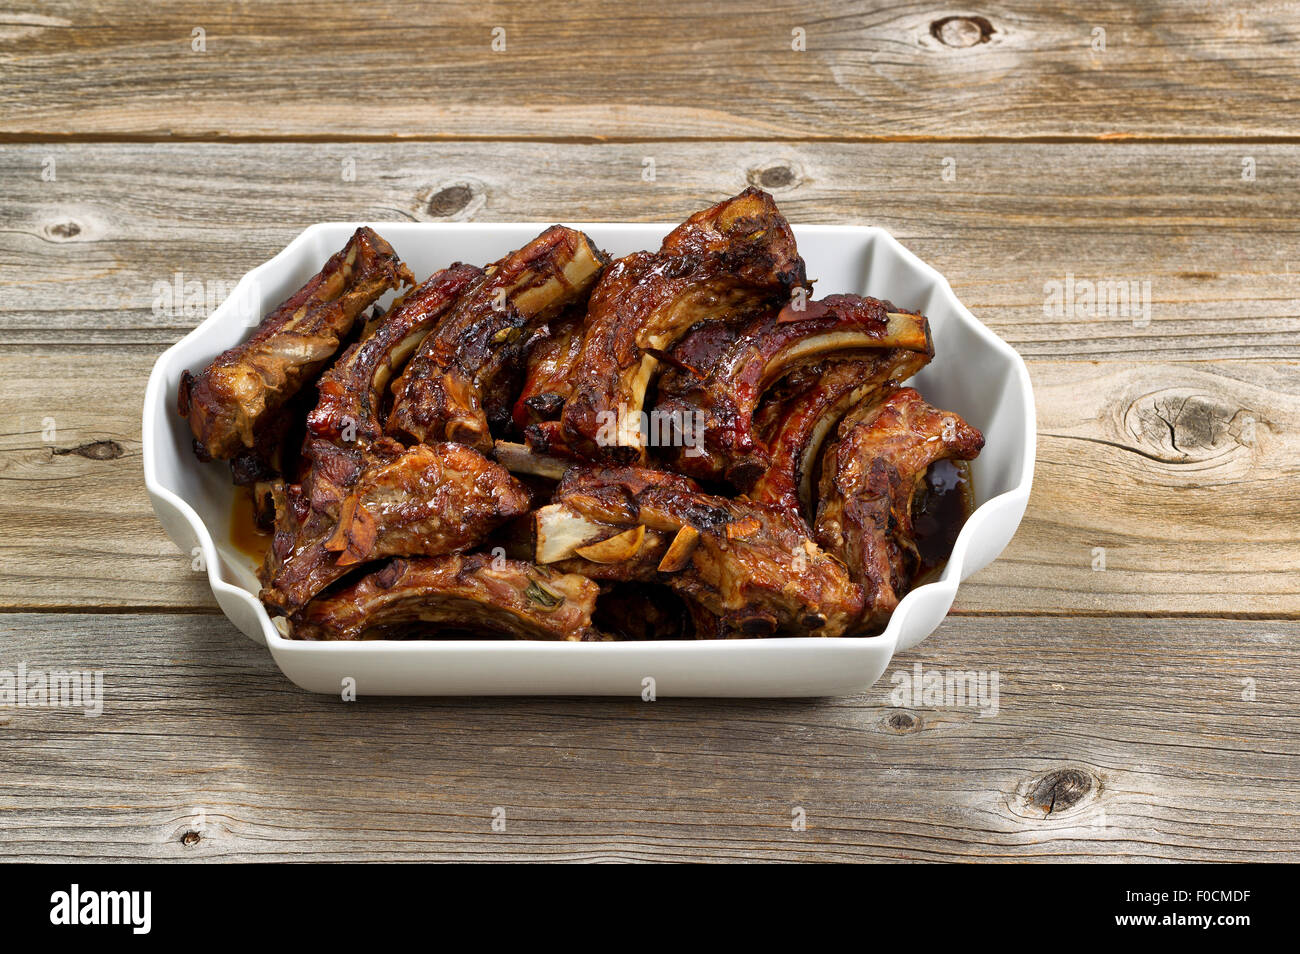 Large plate filled with delicious baked barbecued ribs on rustic wood. Stock Photo